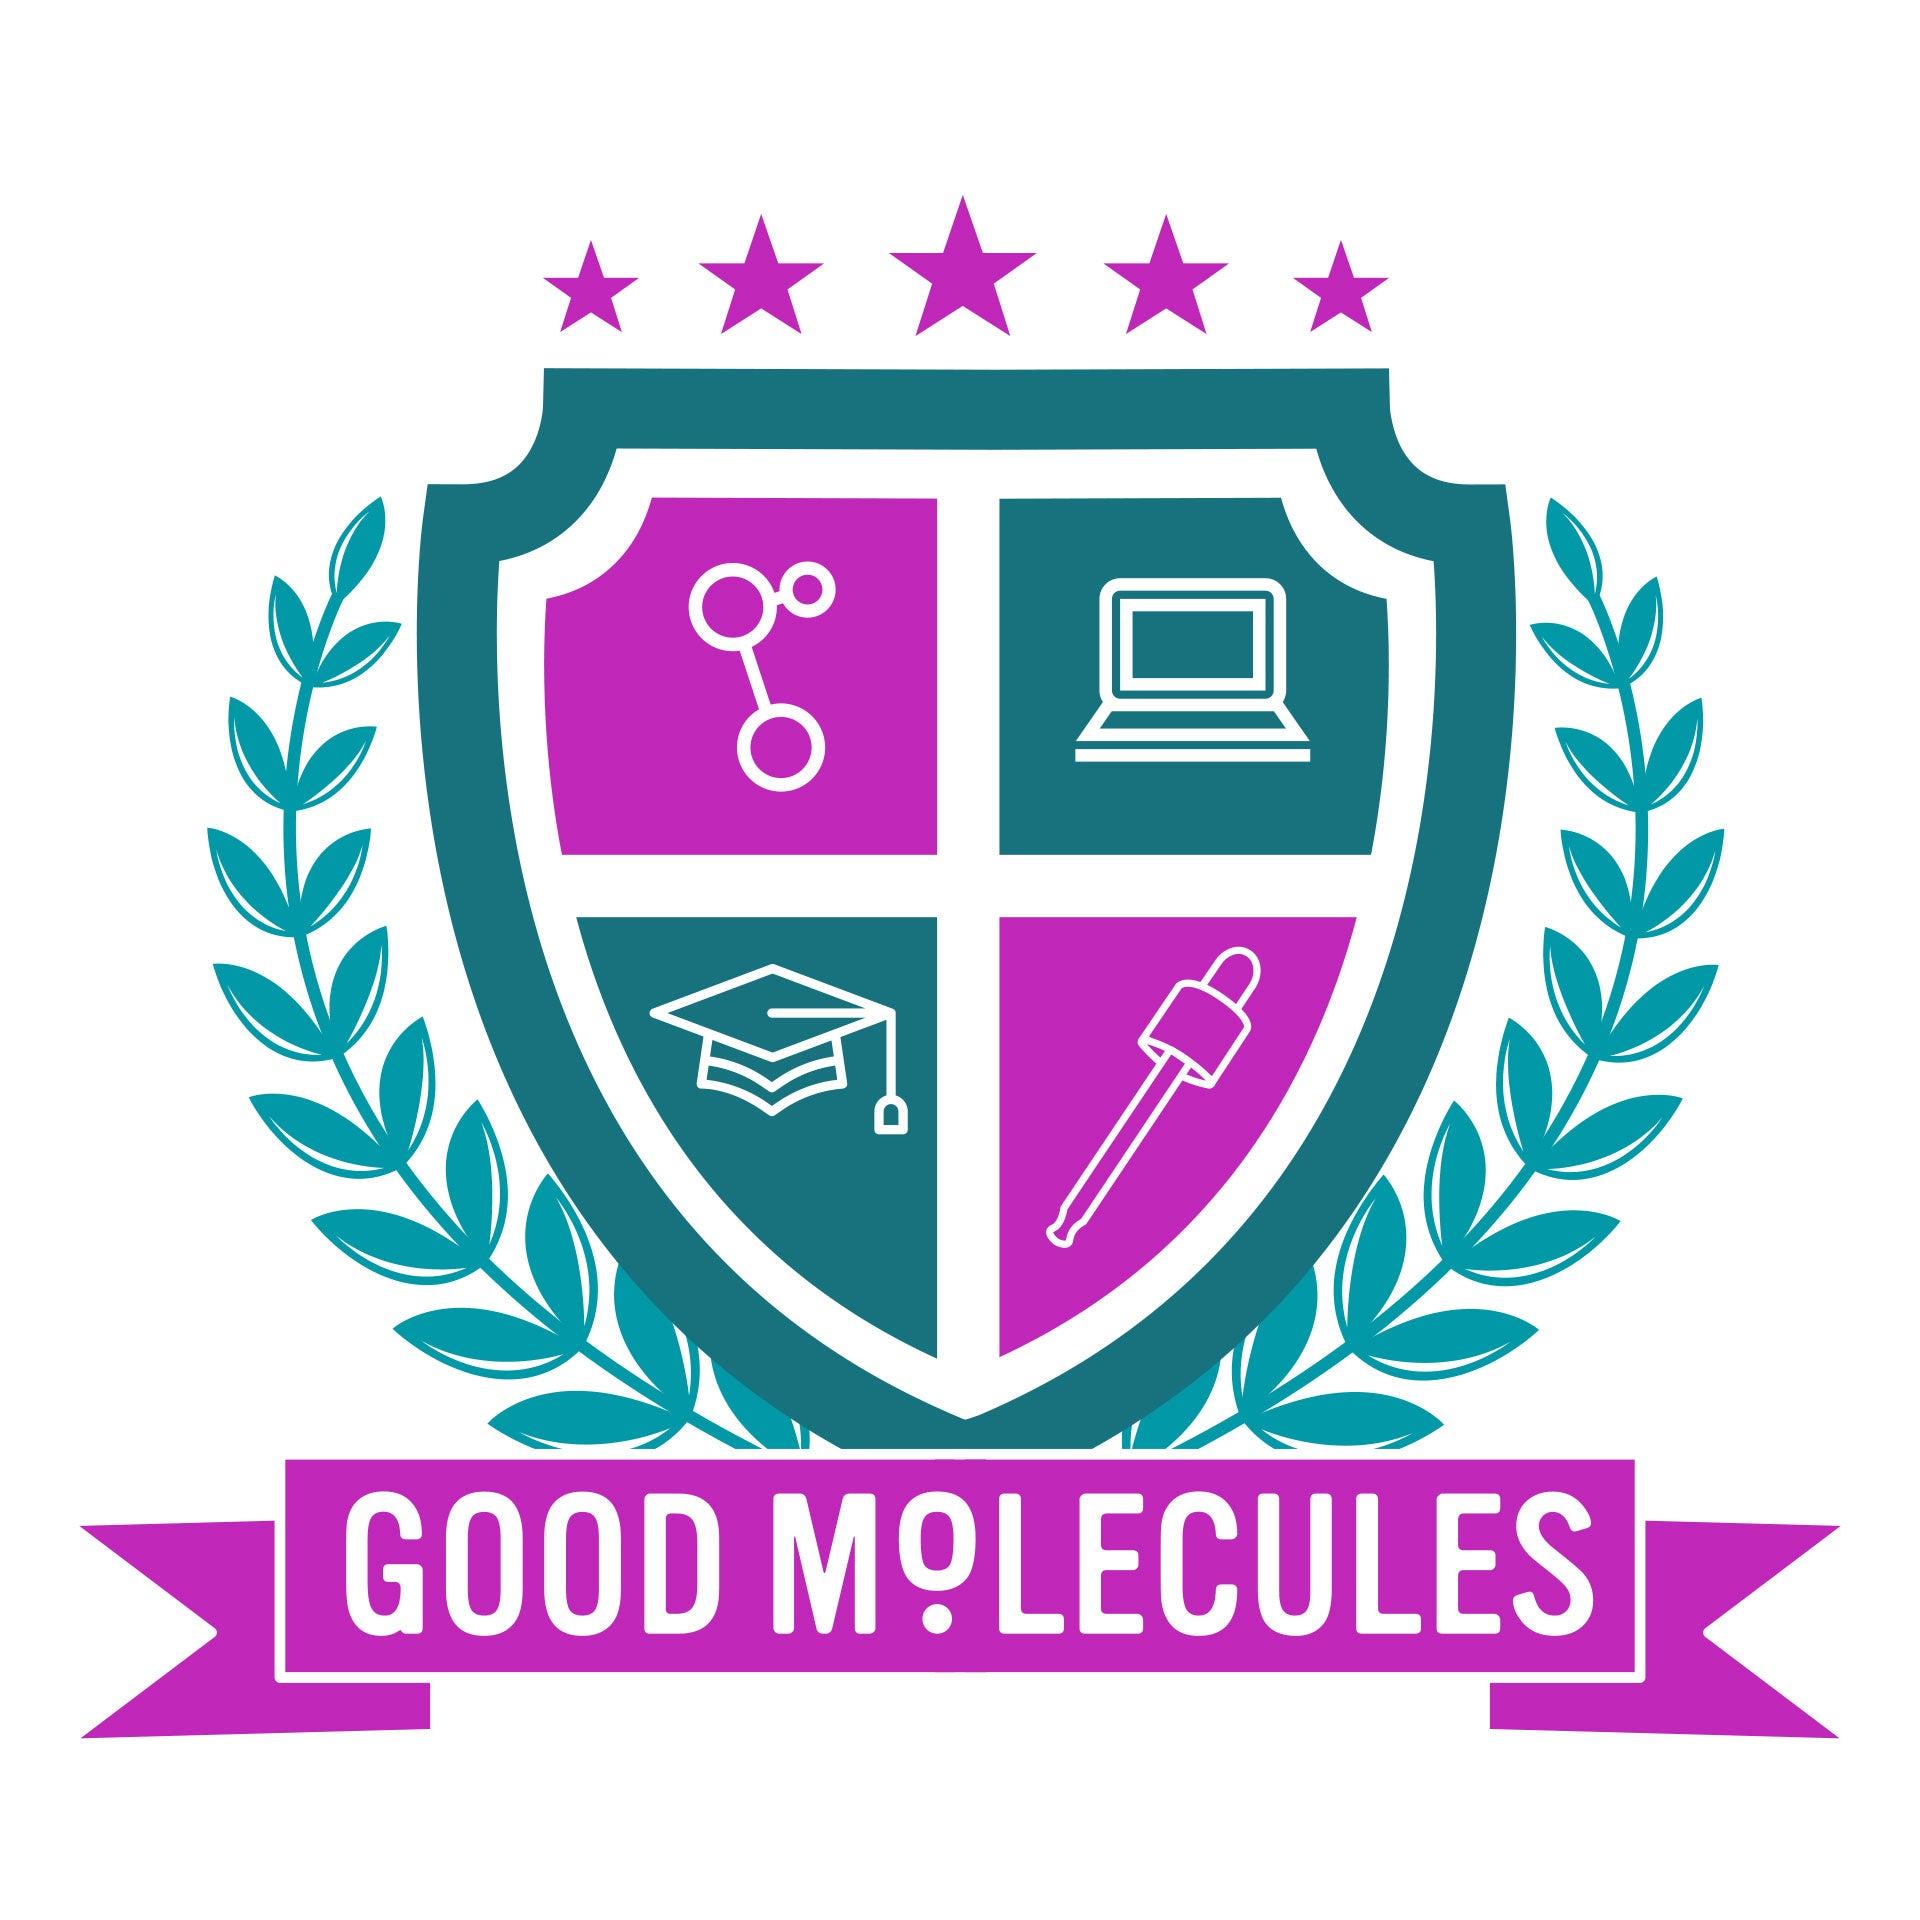 Good Molecules is coming to North Carolina Agricultural and Technical University!